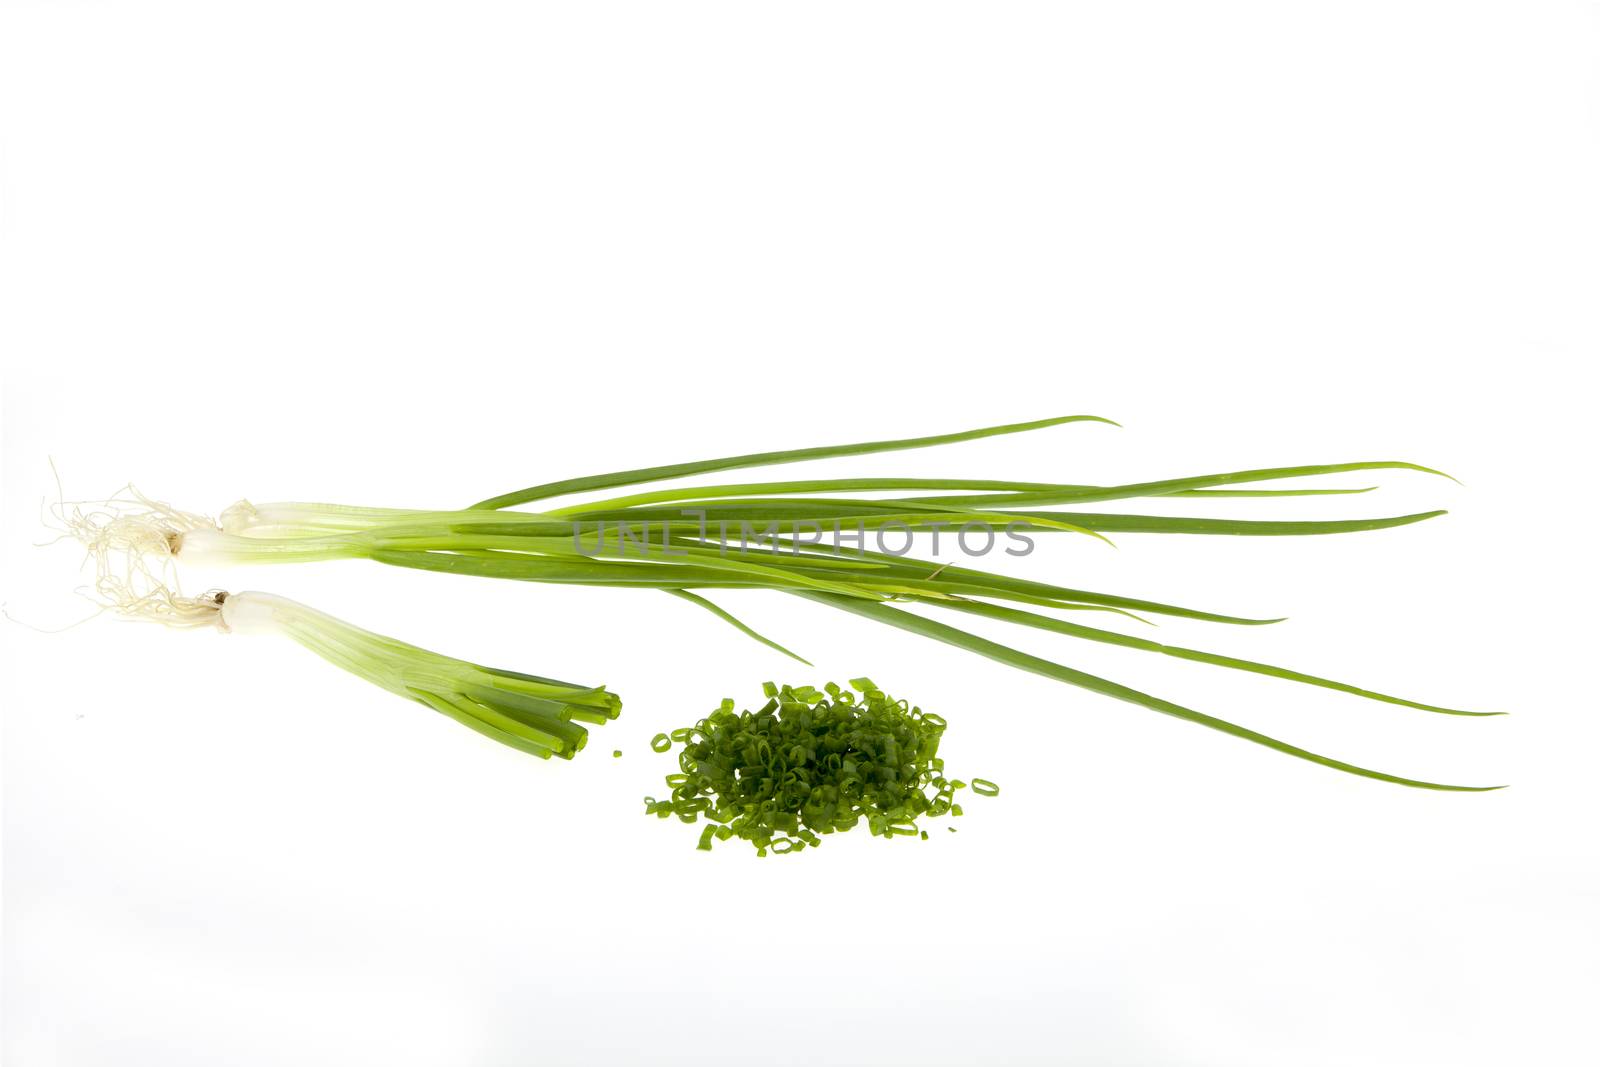 Fresh green chives isolated on white background